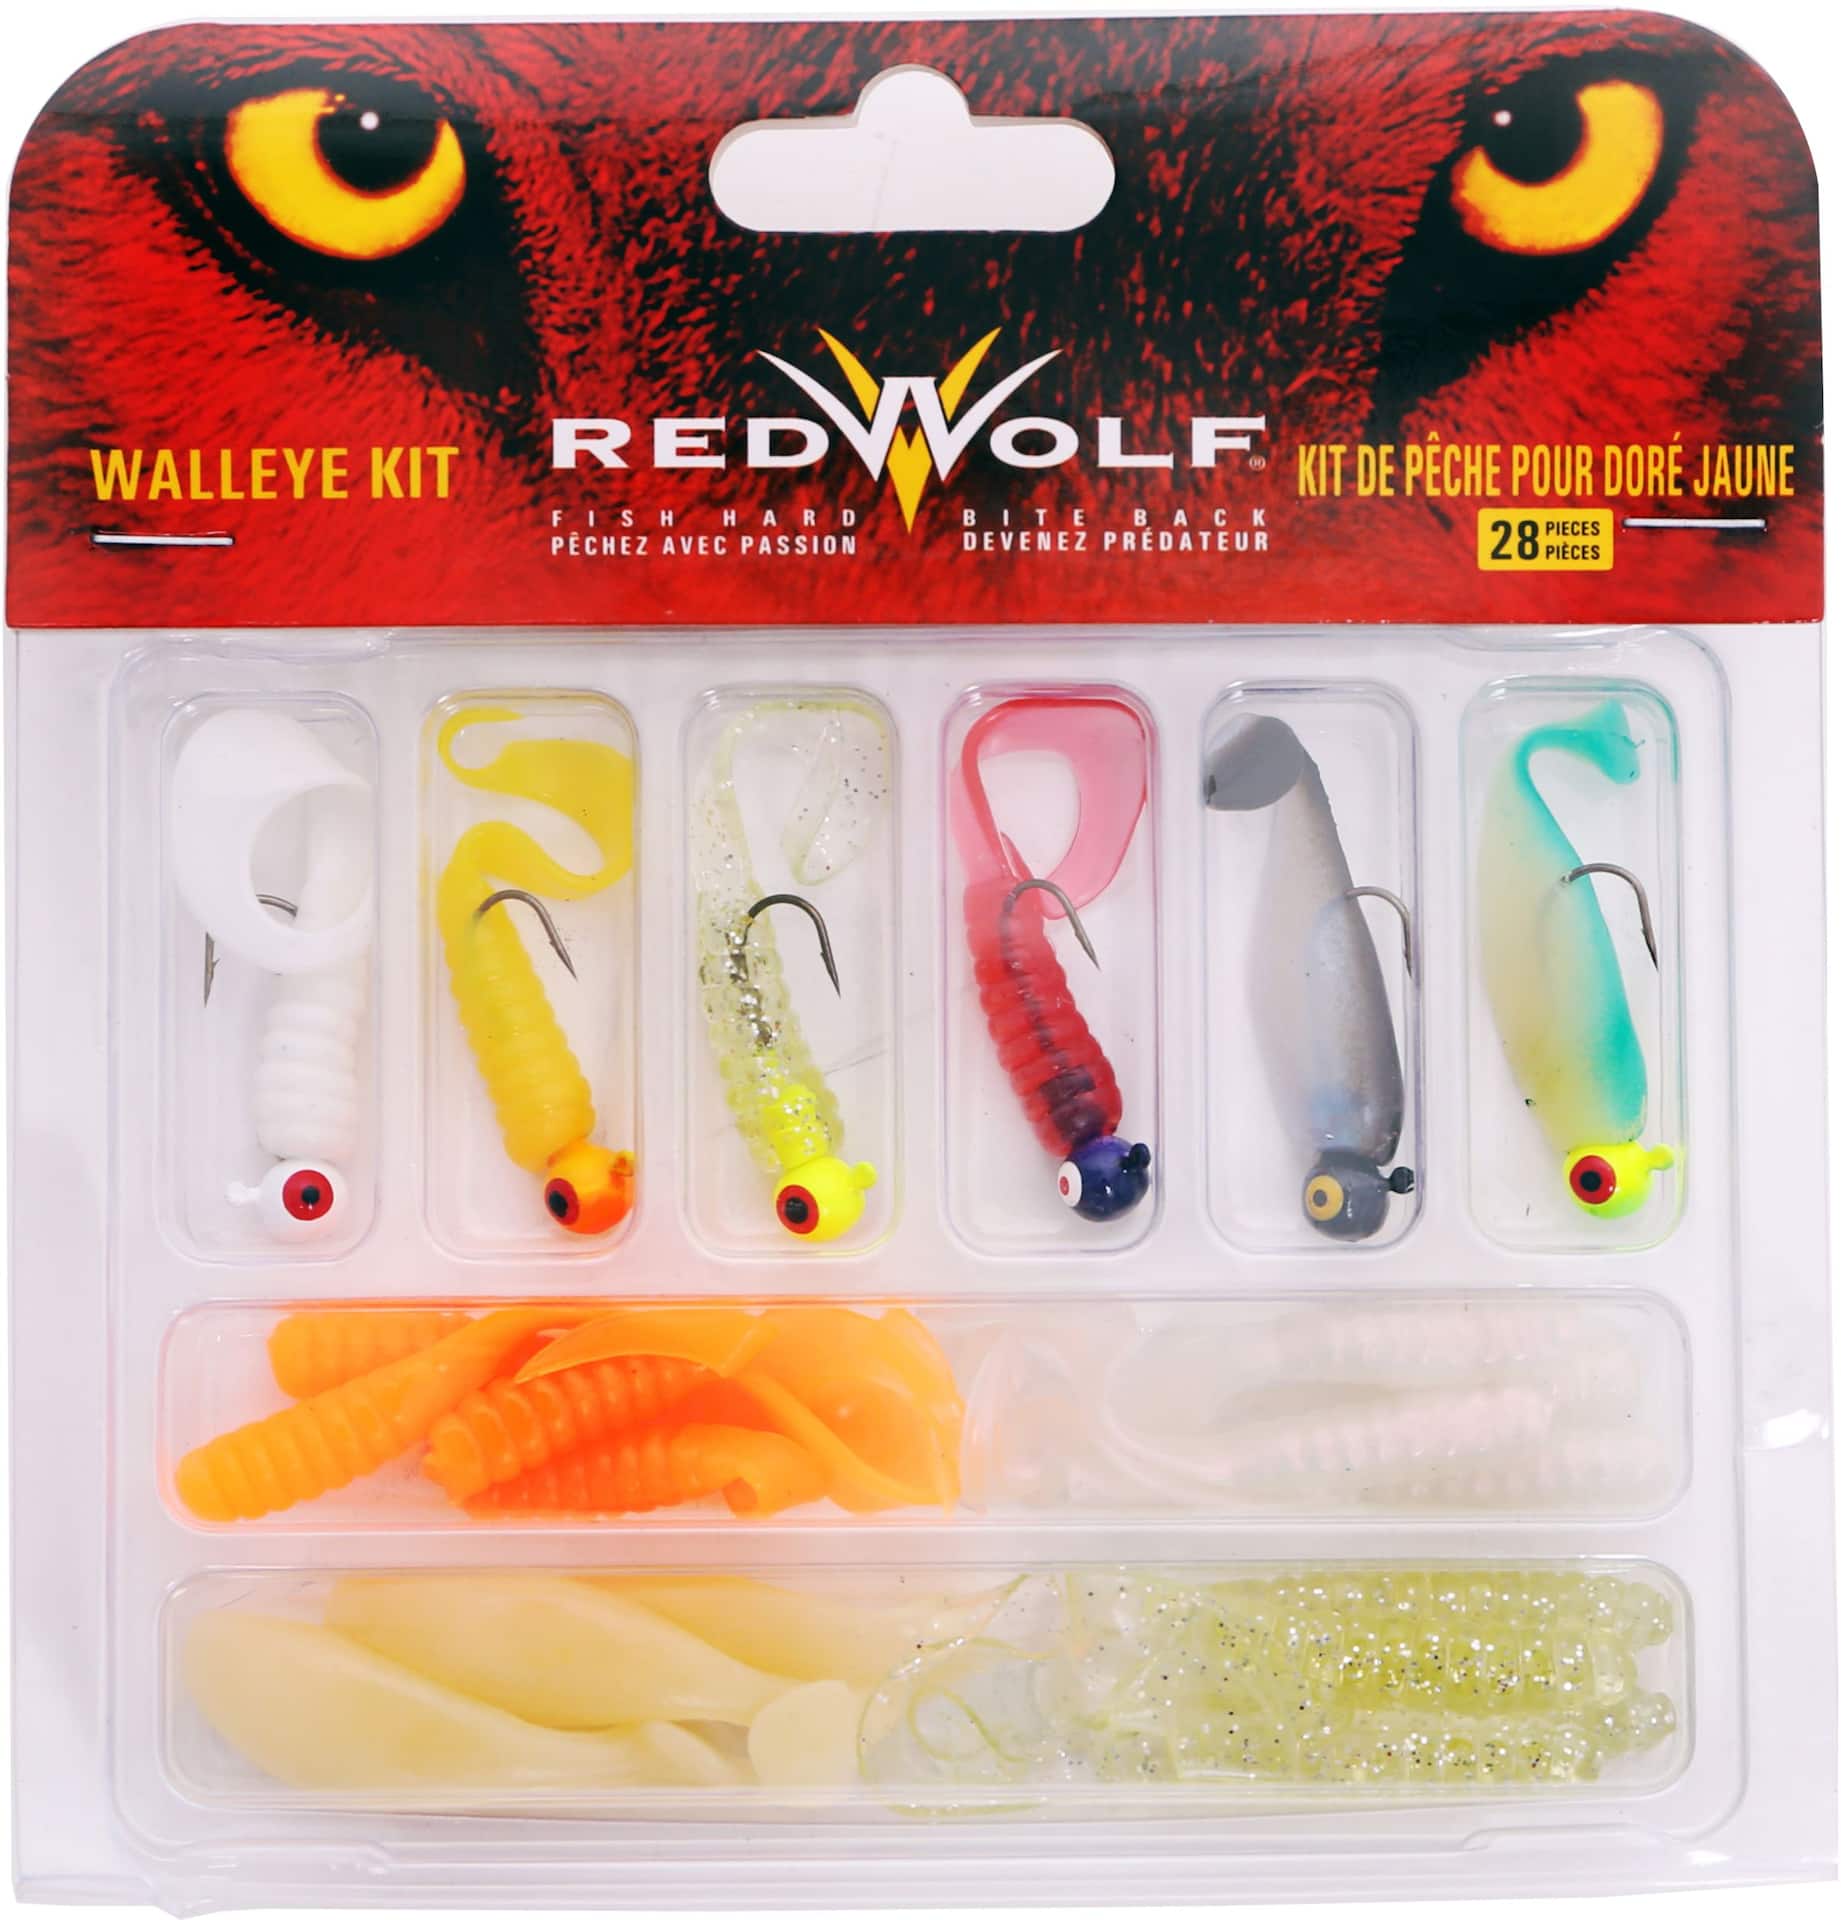 https://media-www.canadiantire.ca/product/playing/fishing/fishing-lures/0777762/red-wolf-walleye-kit-28-piece-087a189b-6722-4aaf-91d3-366662d42bec-jpgrendition.jpg